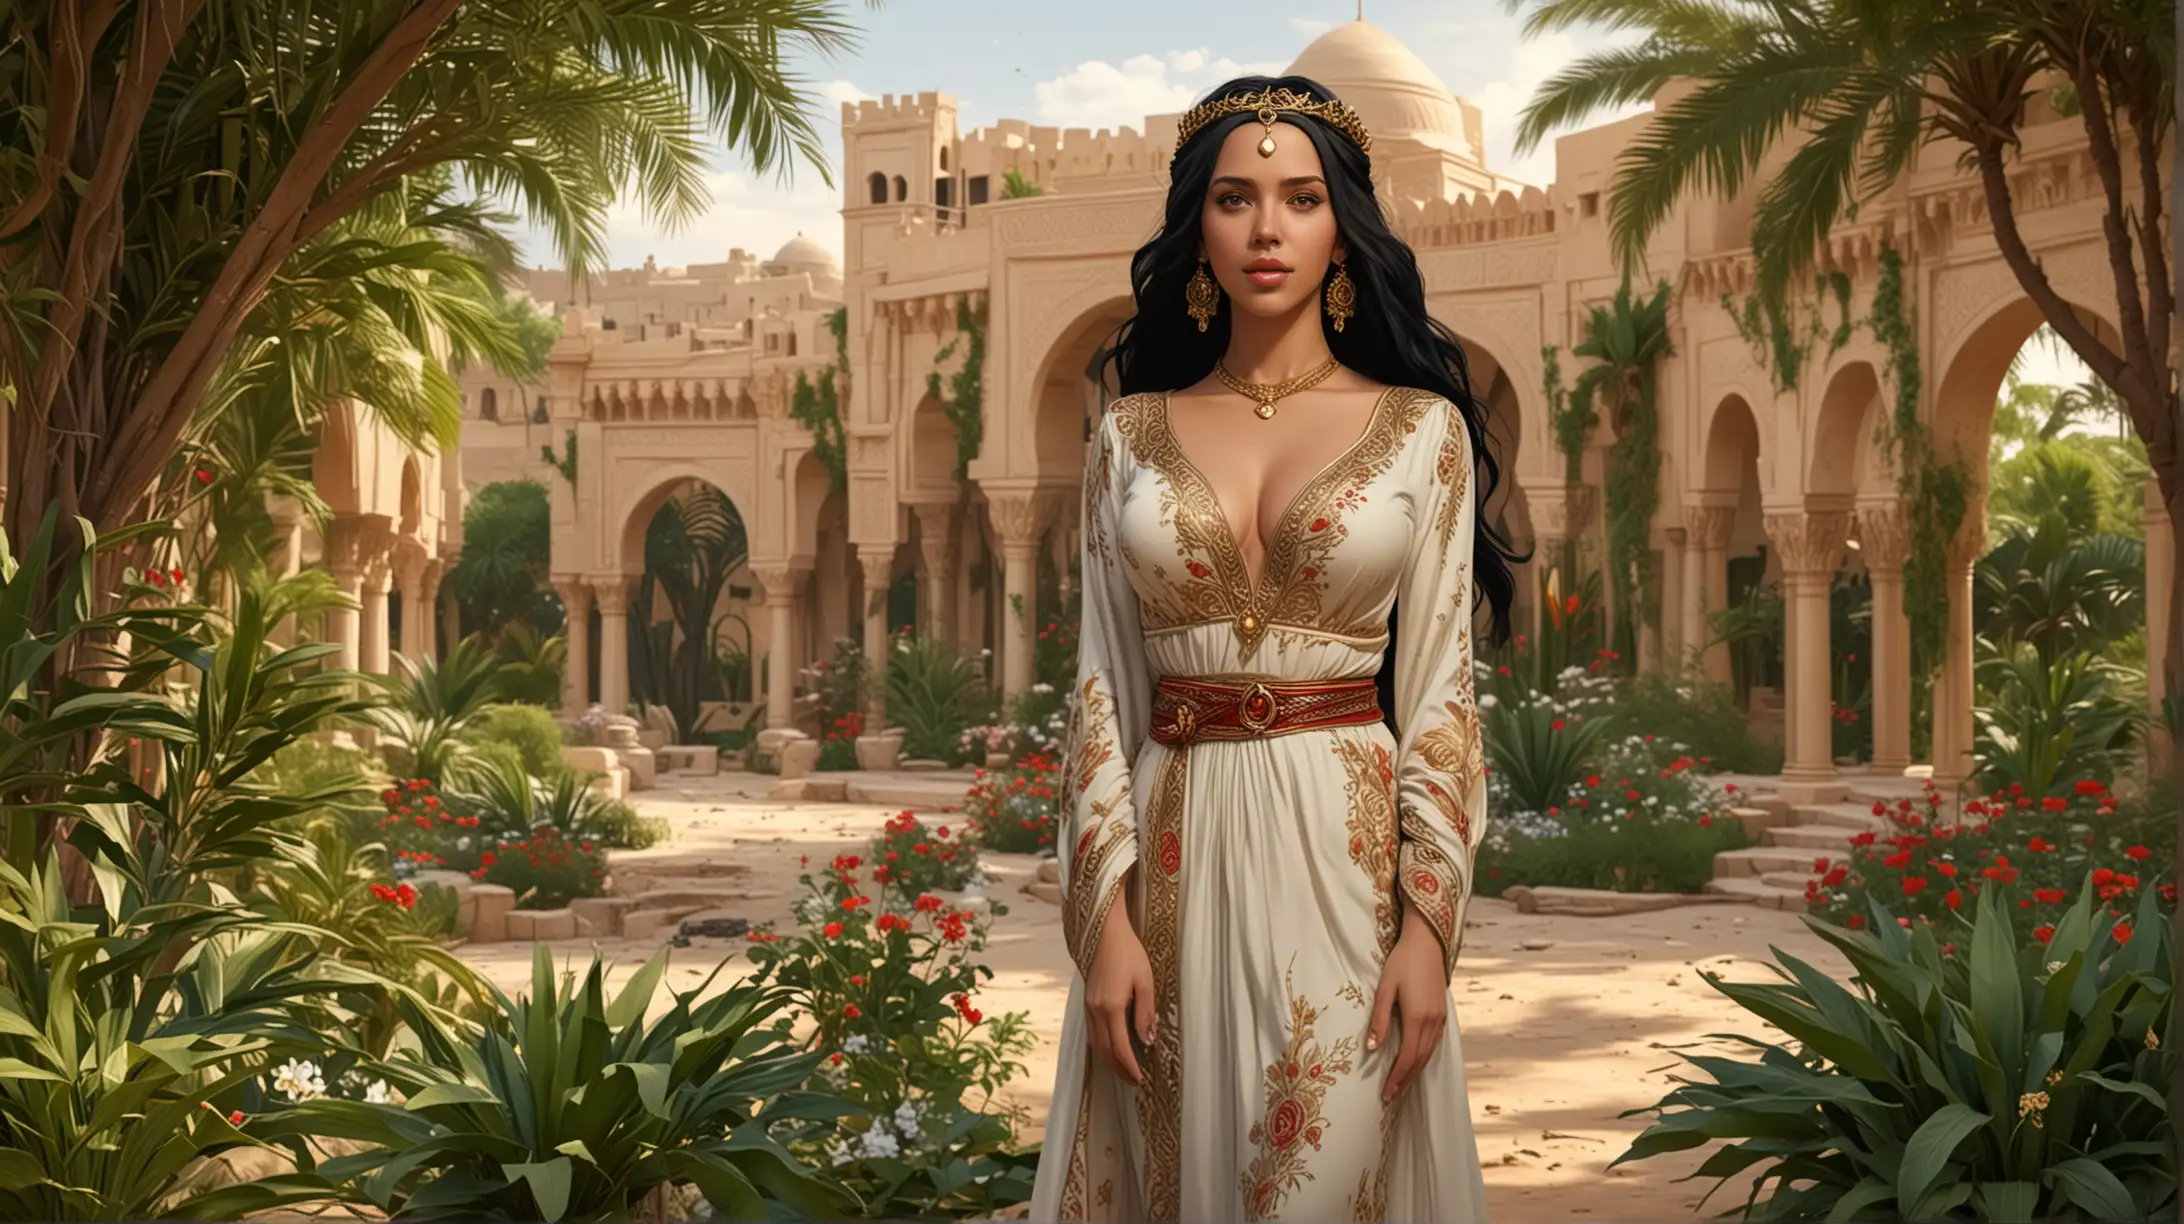 cartoon, Scarlett Johansson as Beautiful young arab empress goddess with long black hair standing full-body with a wonderful smile, an oasis with lush vegetation in the background